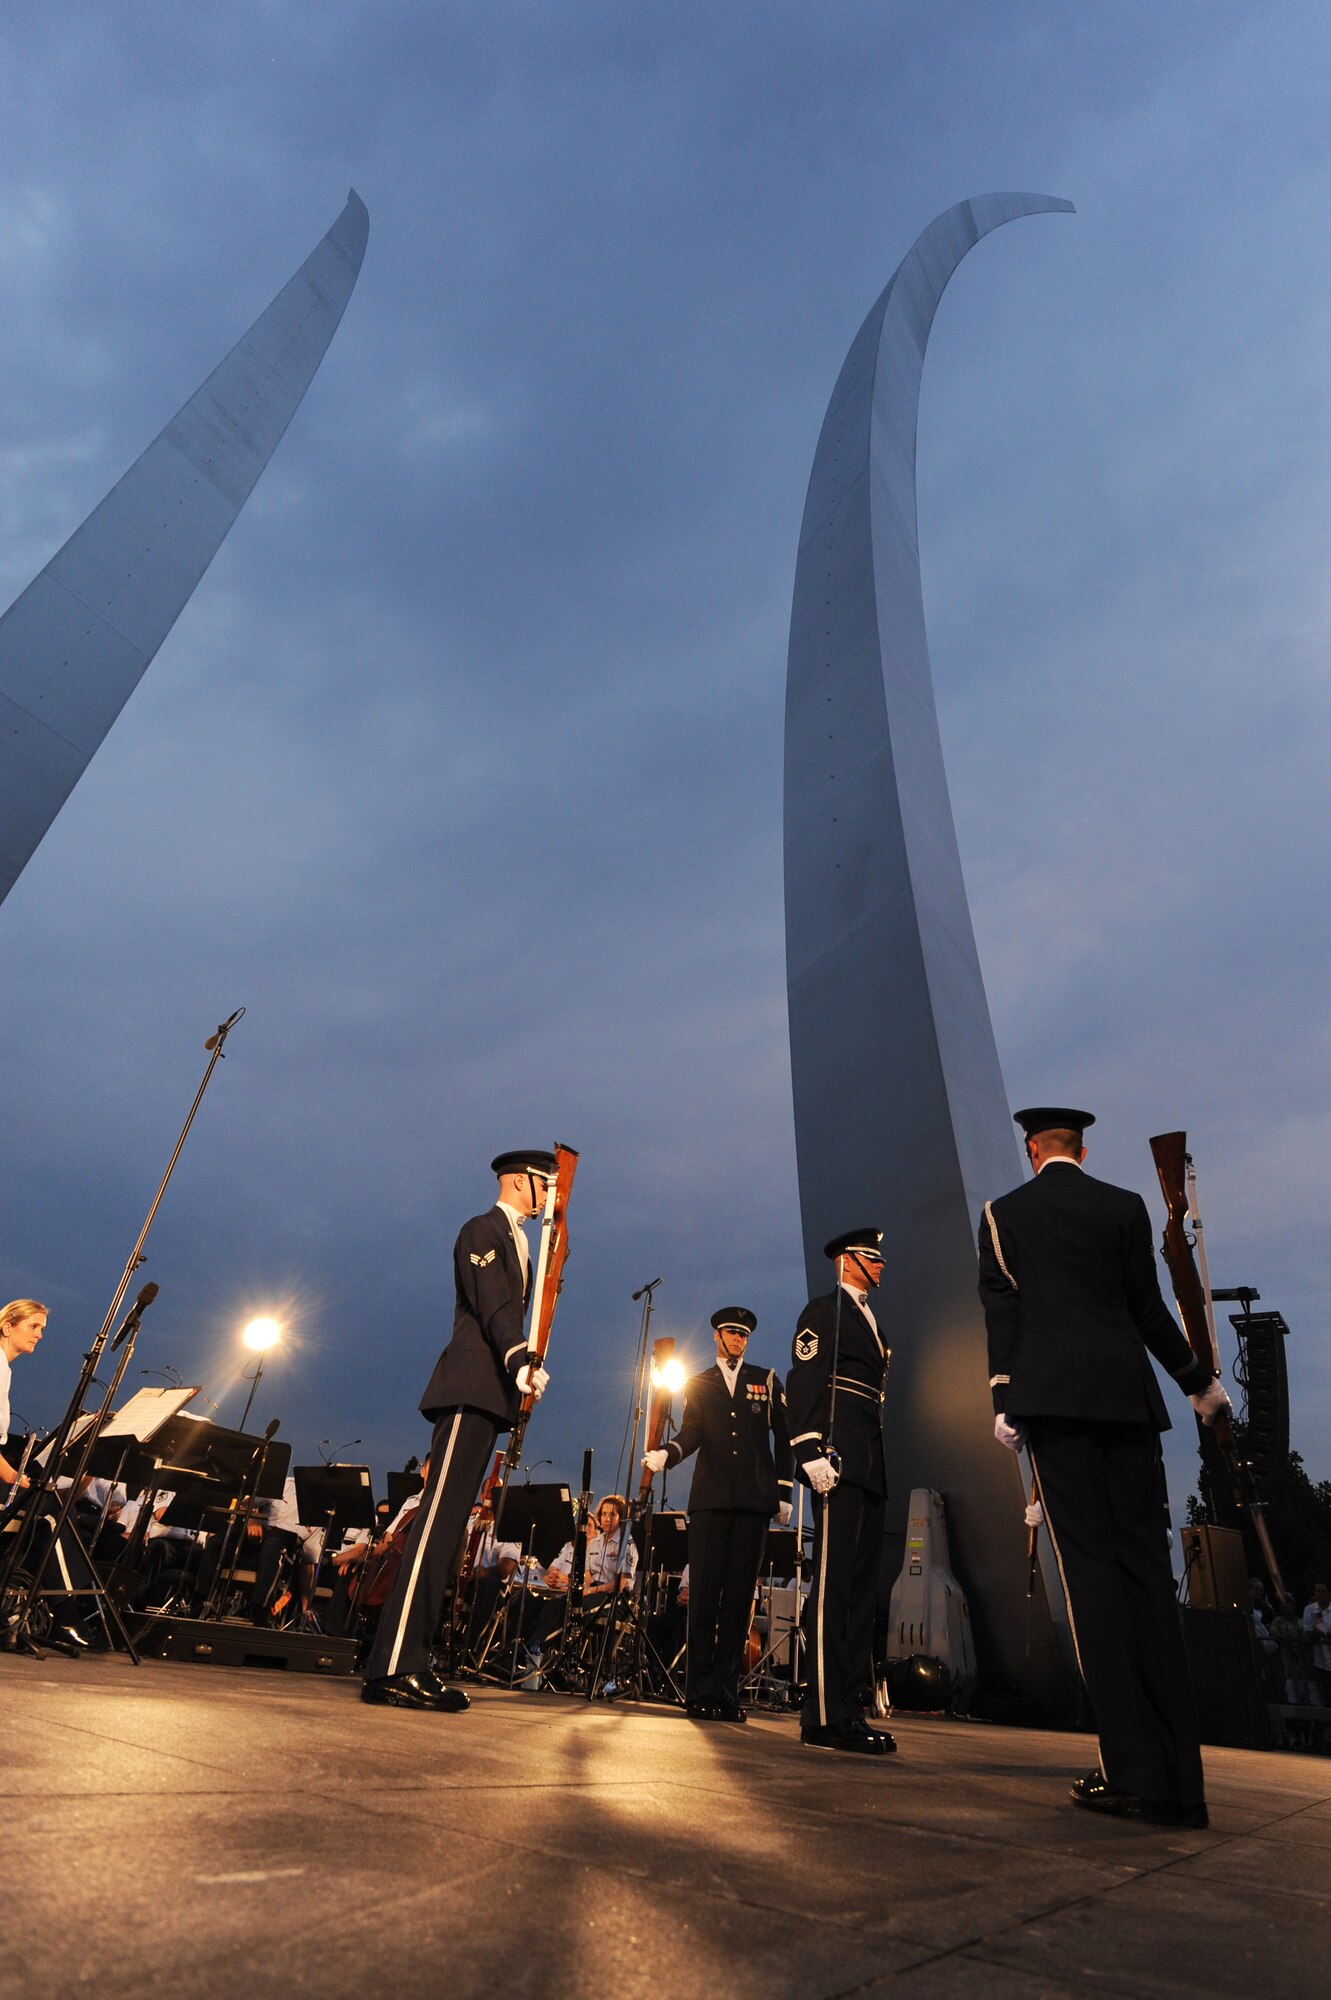 The Air Force Memorial stands high overlooking the U.S. Air Force Honor Guards Drill Team’s performance in celebration of Independence Day in Arlington Va. July 4. The memorial was presented to the nation during a formal dedication on October 14, 2006. (U.S. Air Force photo by Staff Sgt. Christopher Ruano)